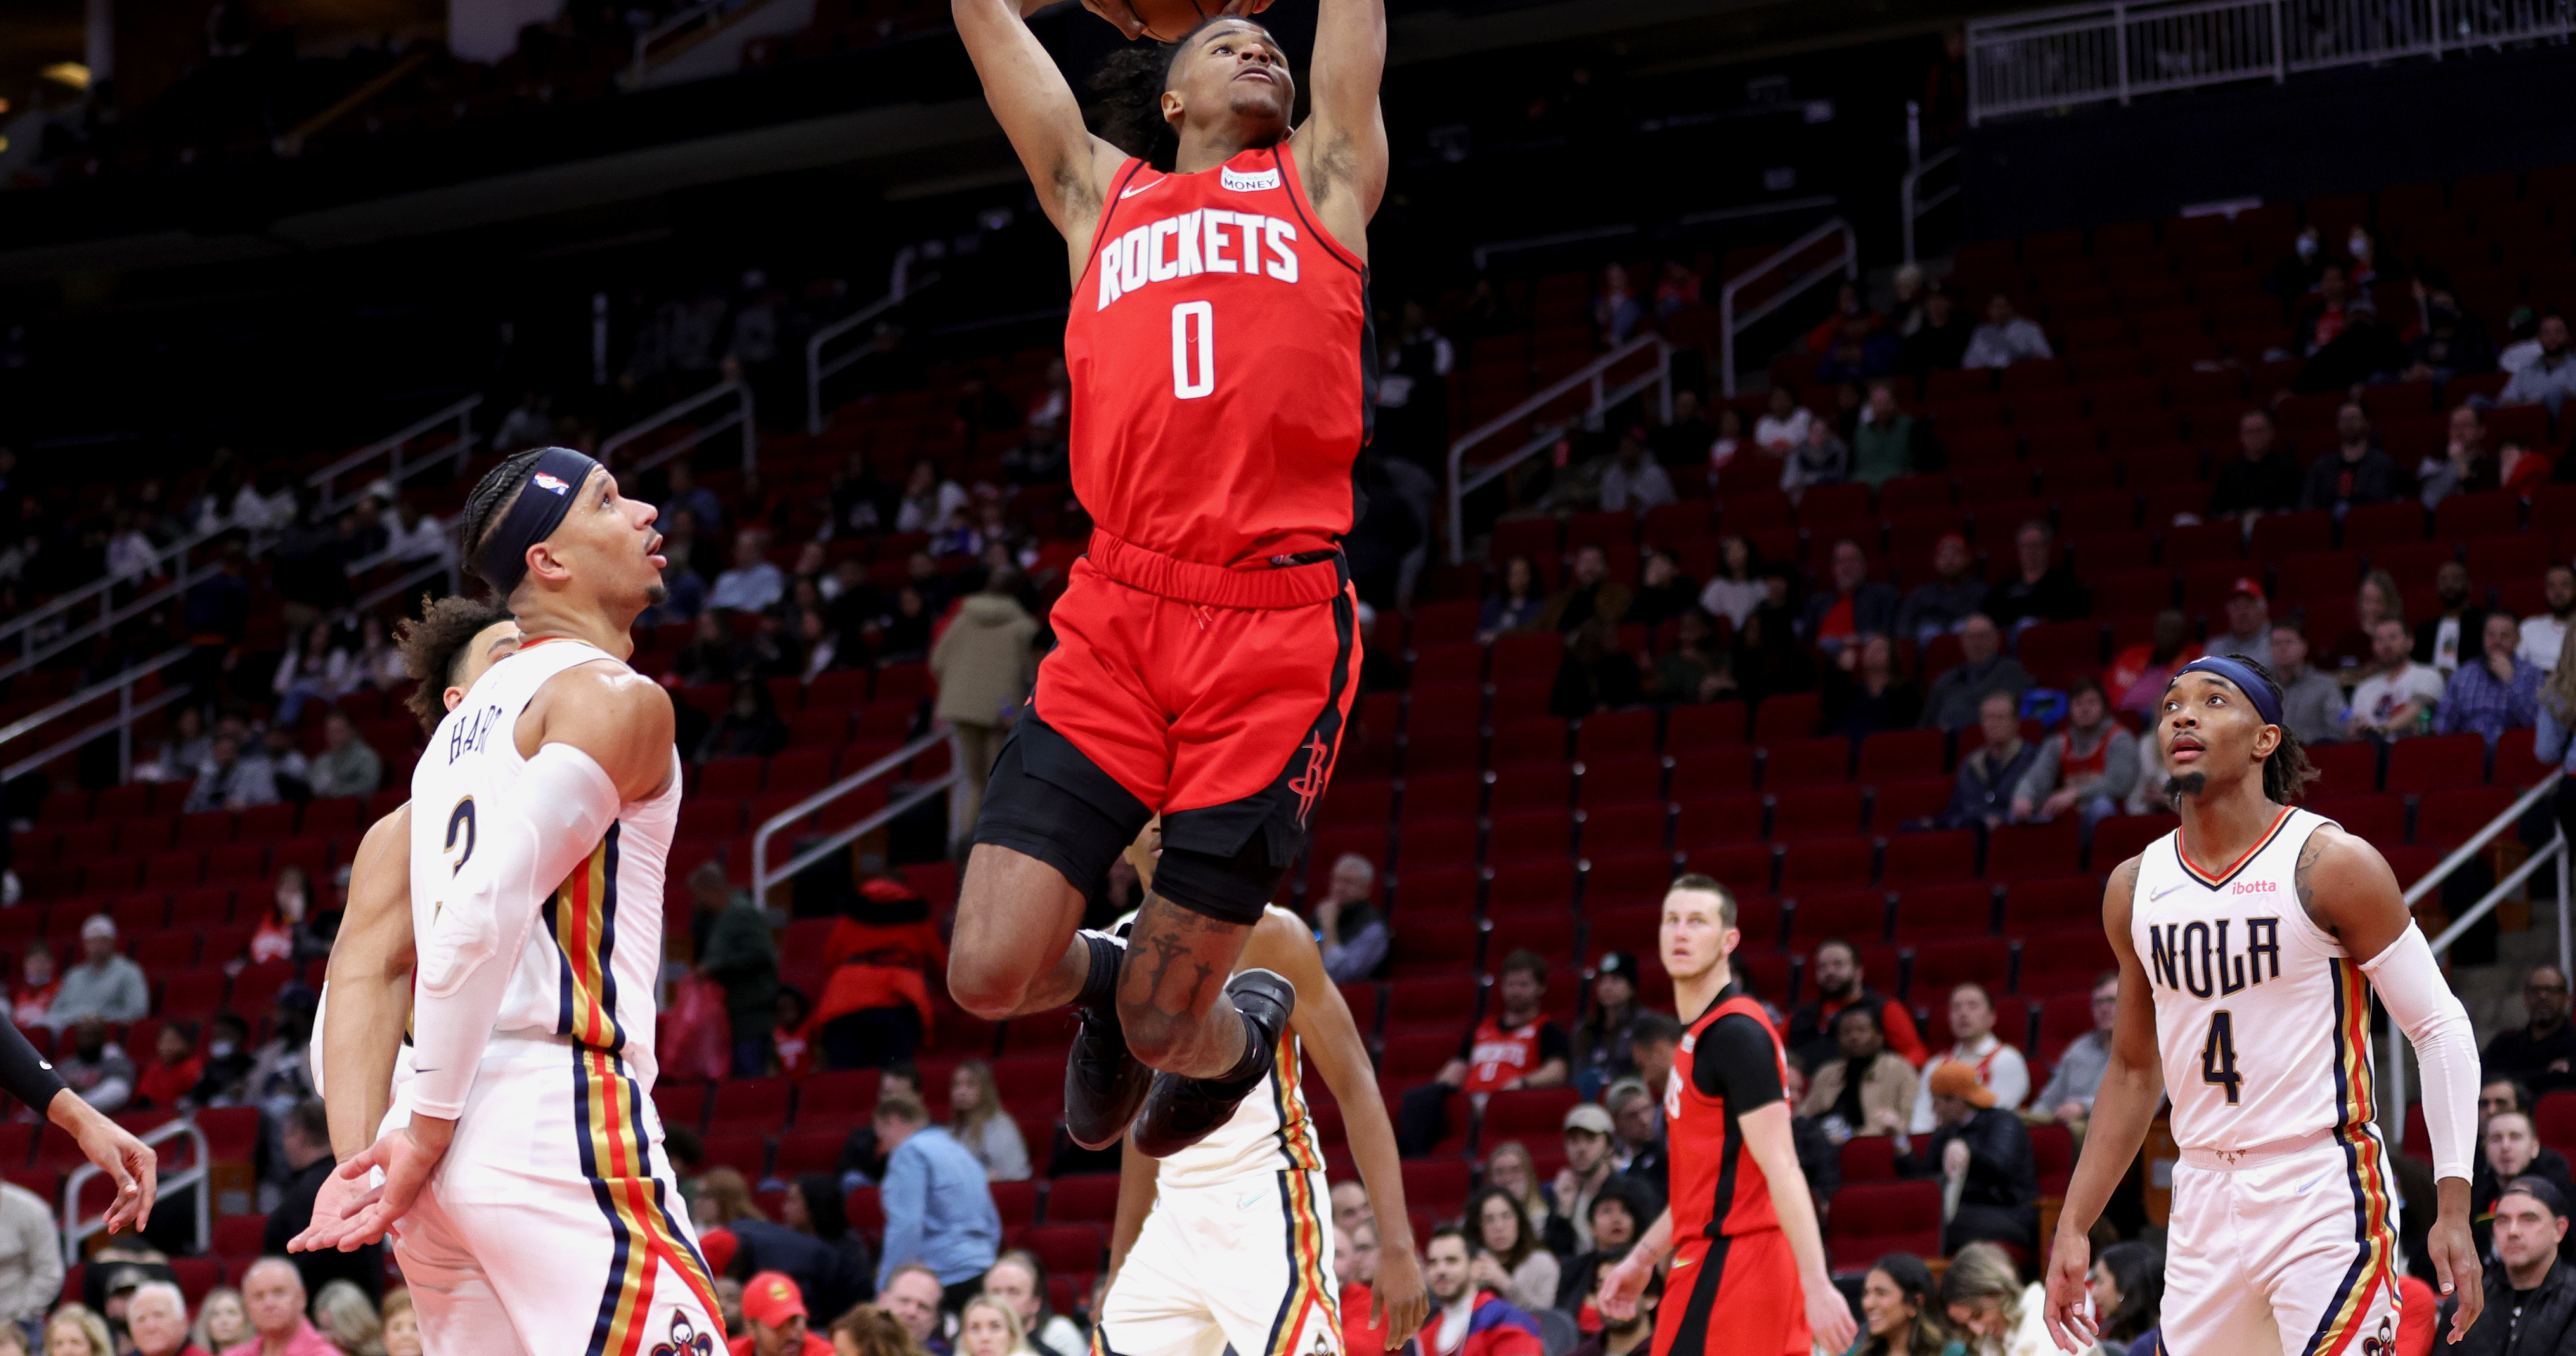 Can Houston Rockets rookie Jalen Green win the Slam Dunk Contest